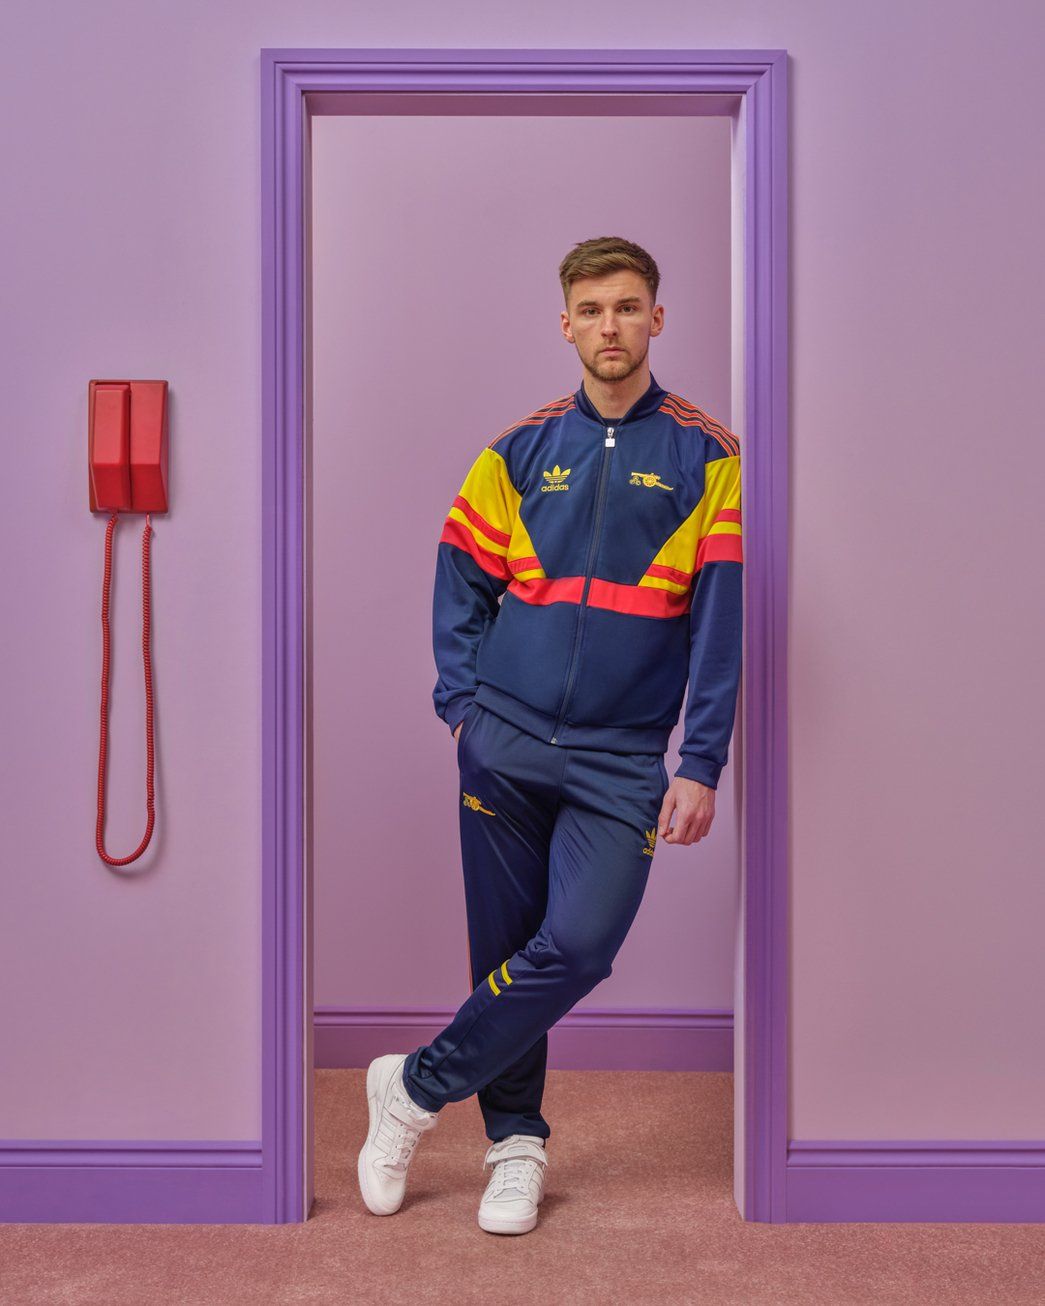 The retro collection of Arsenal by adidas